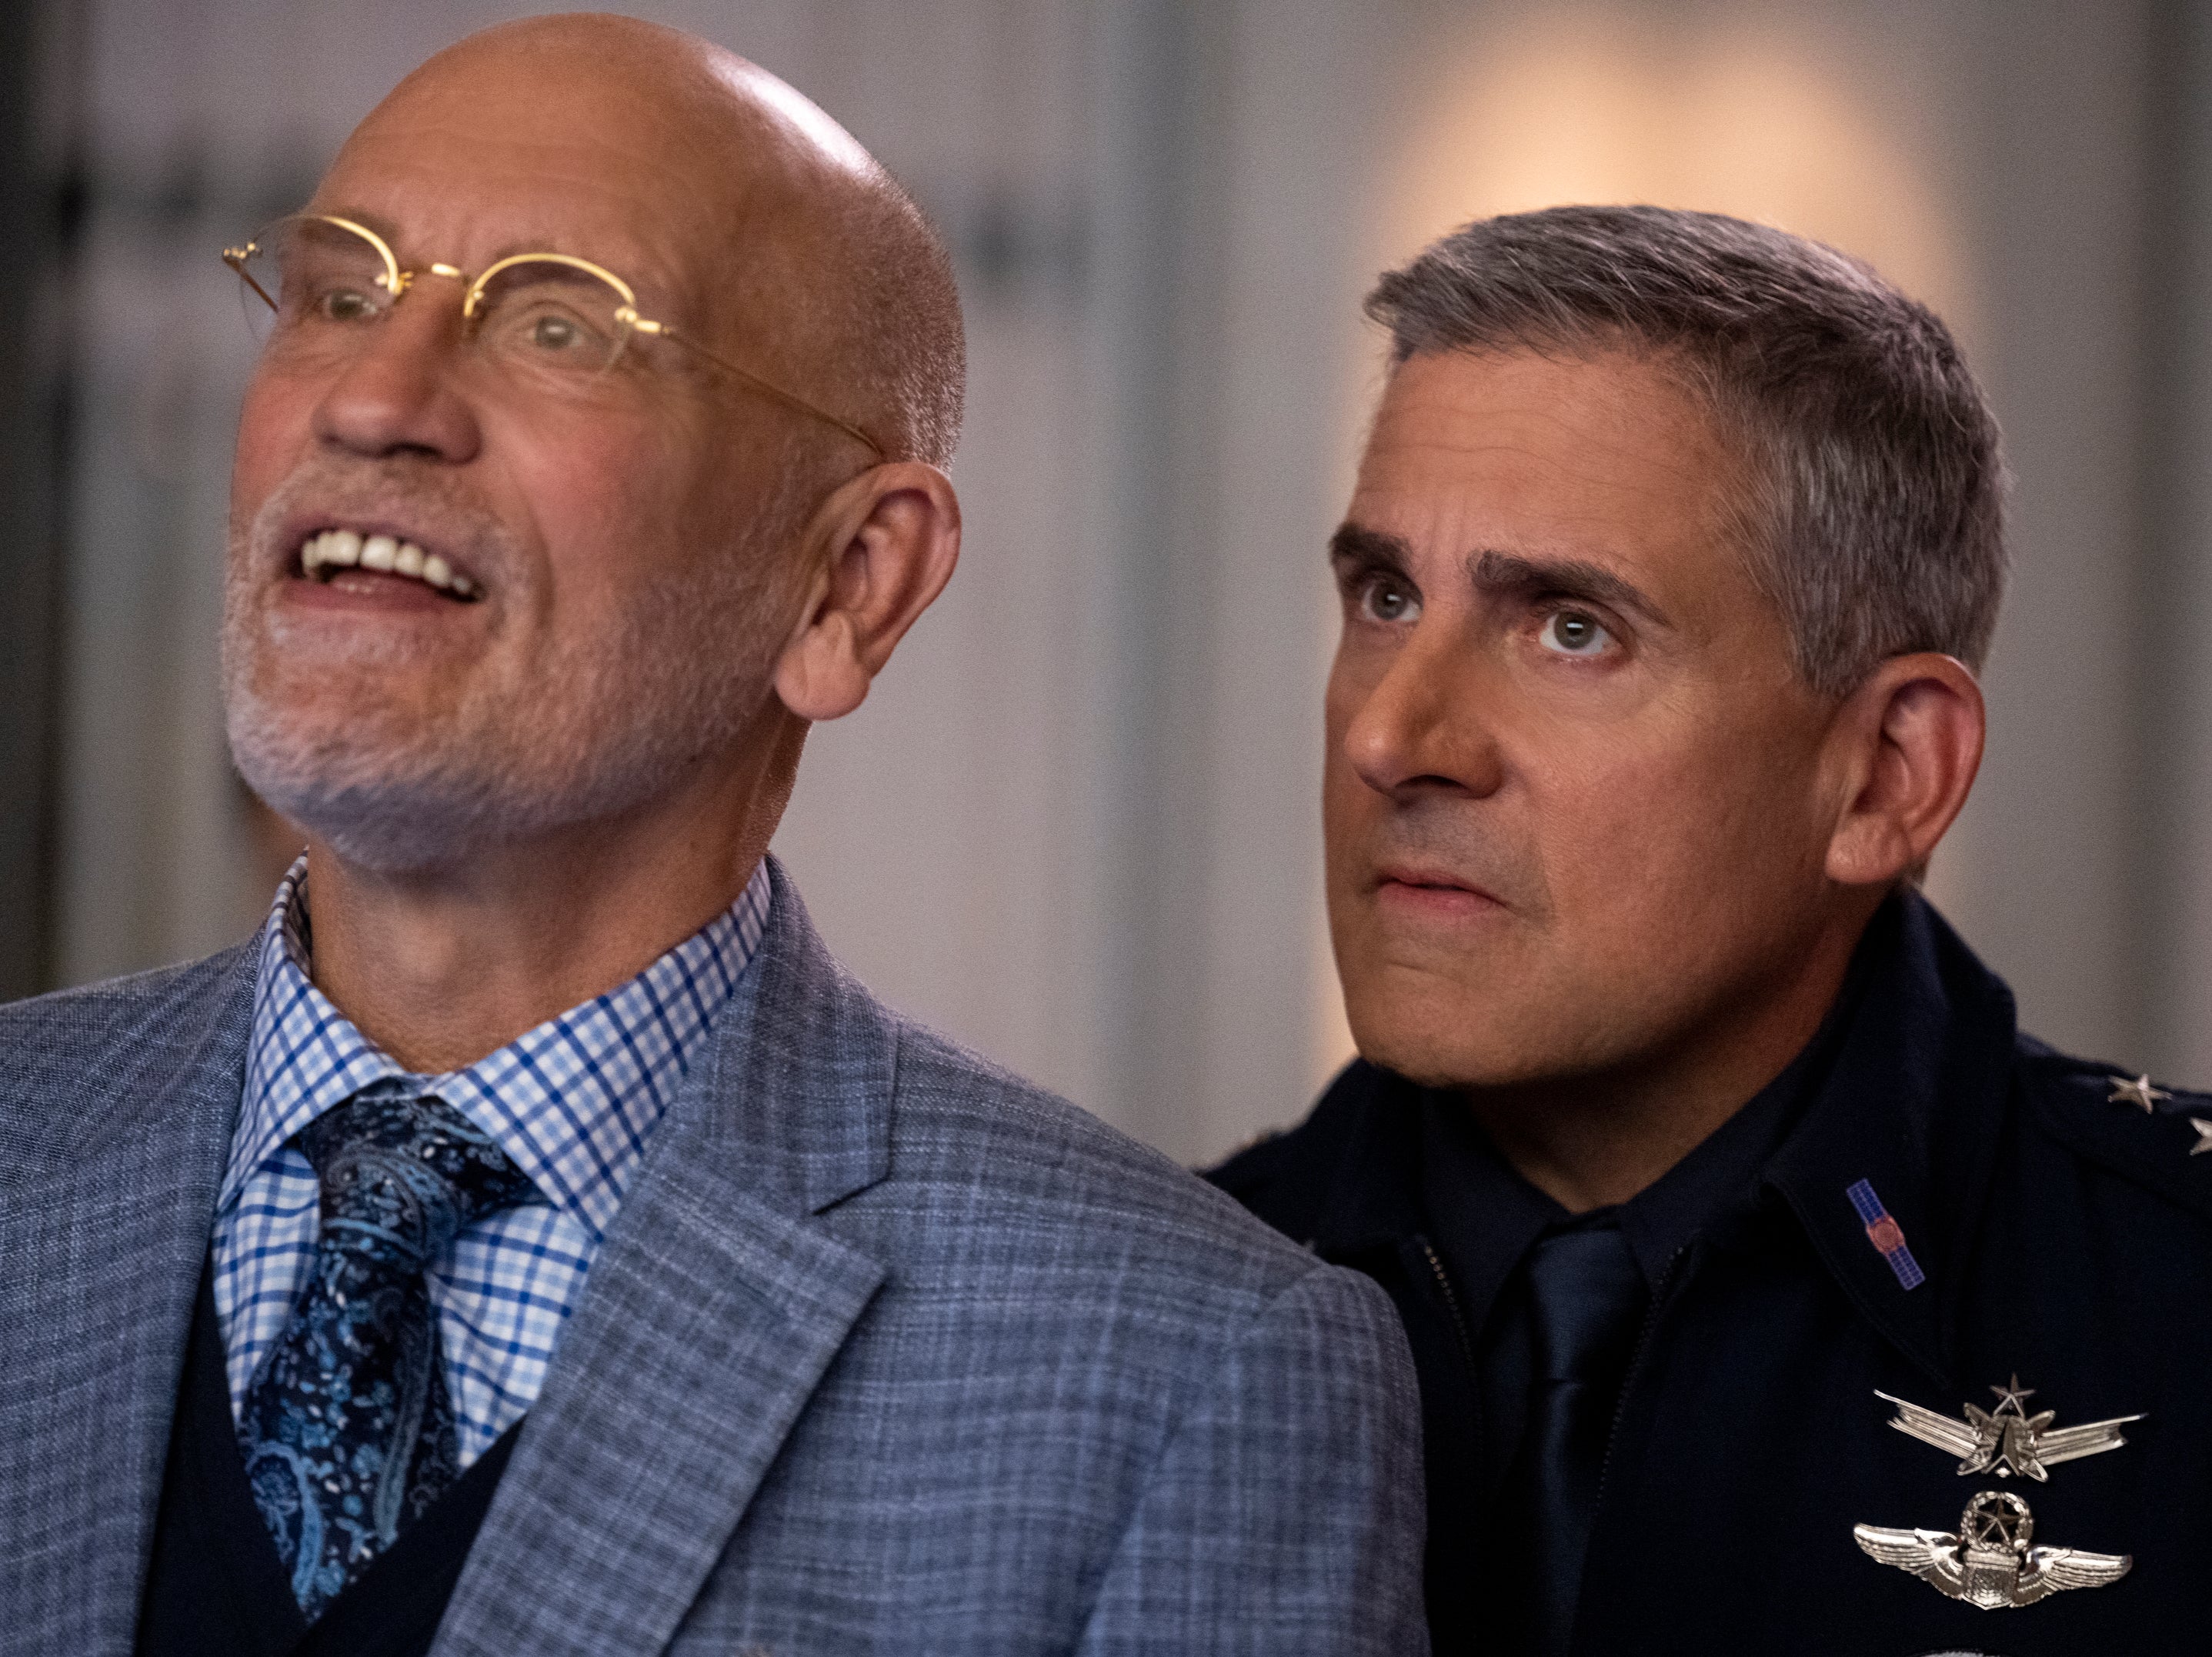 Failure to launch: John Malkovich and Steve Carell return in the second season of the underwhelming ‘Space Force'